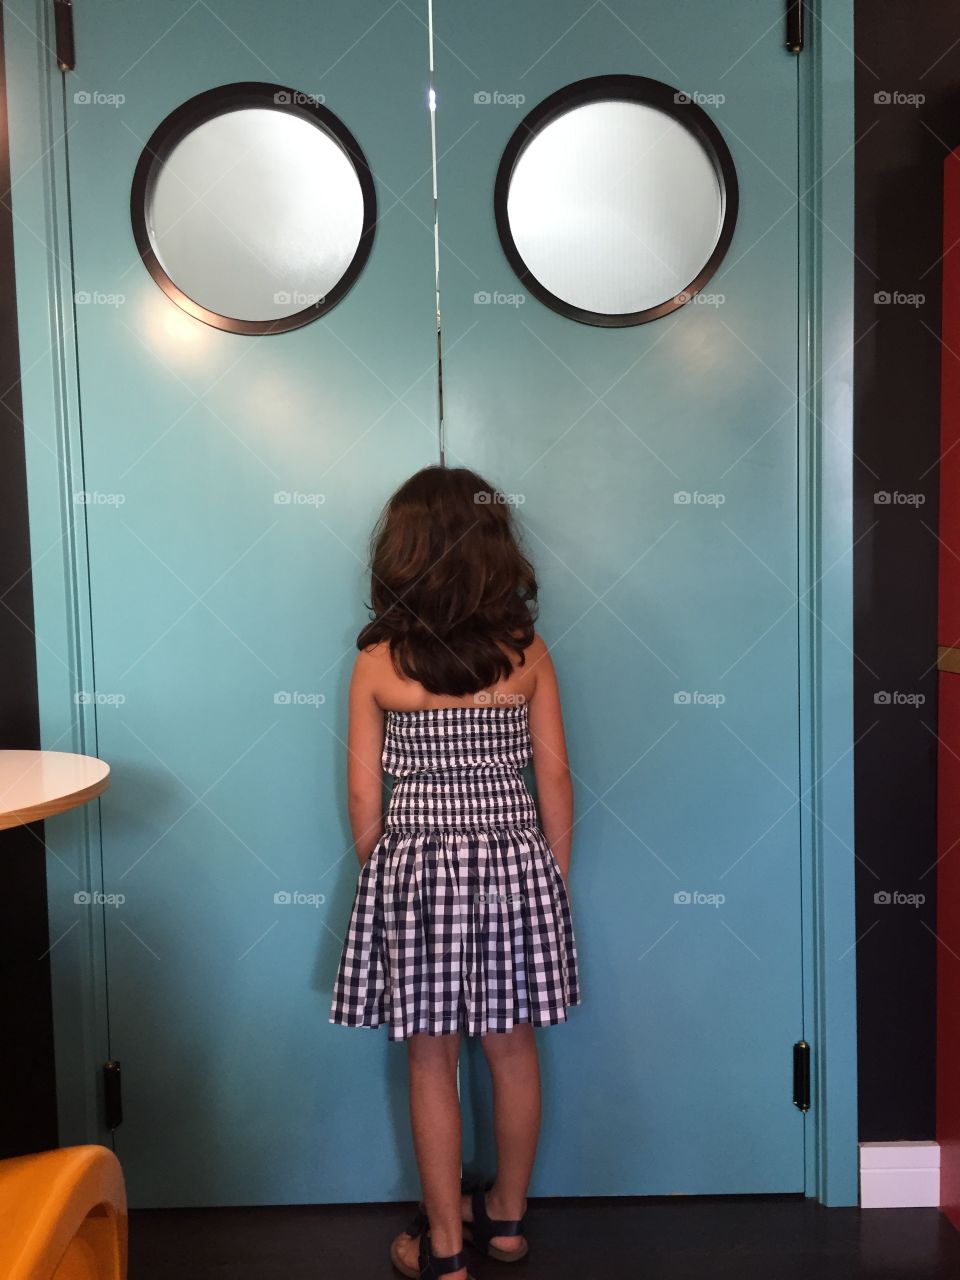 Rear view of girl standing in front of lift